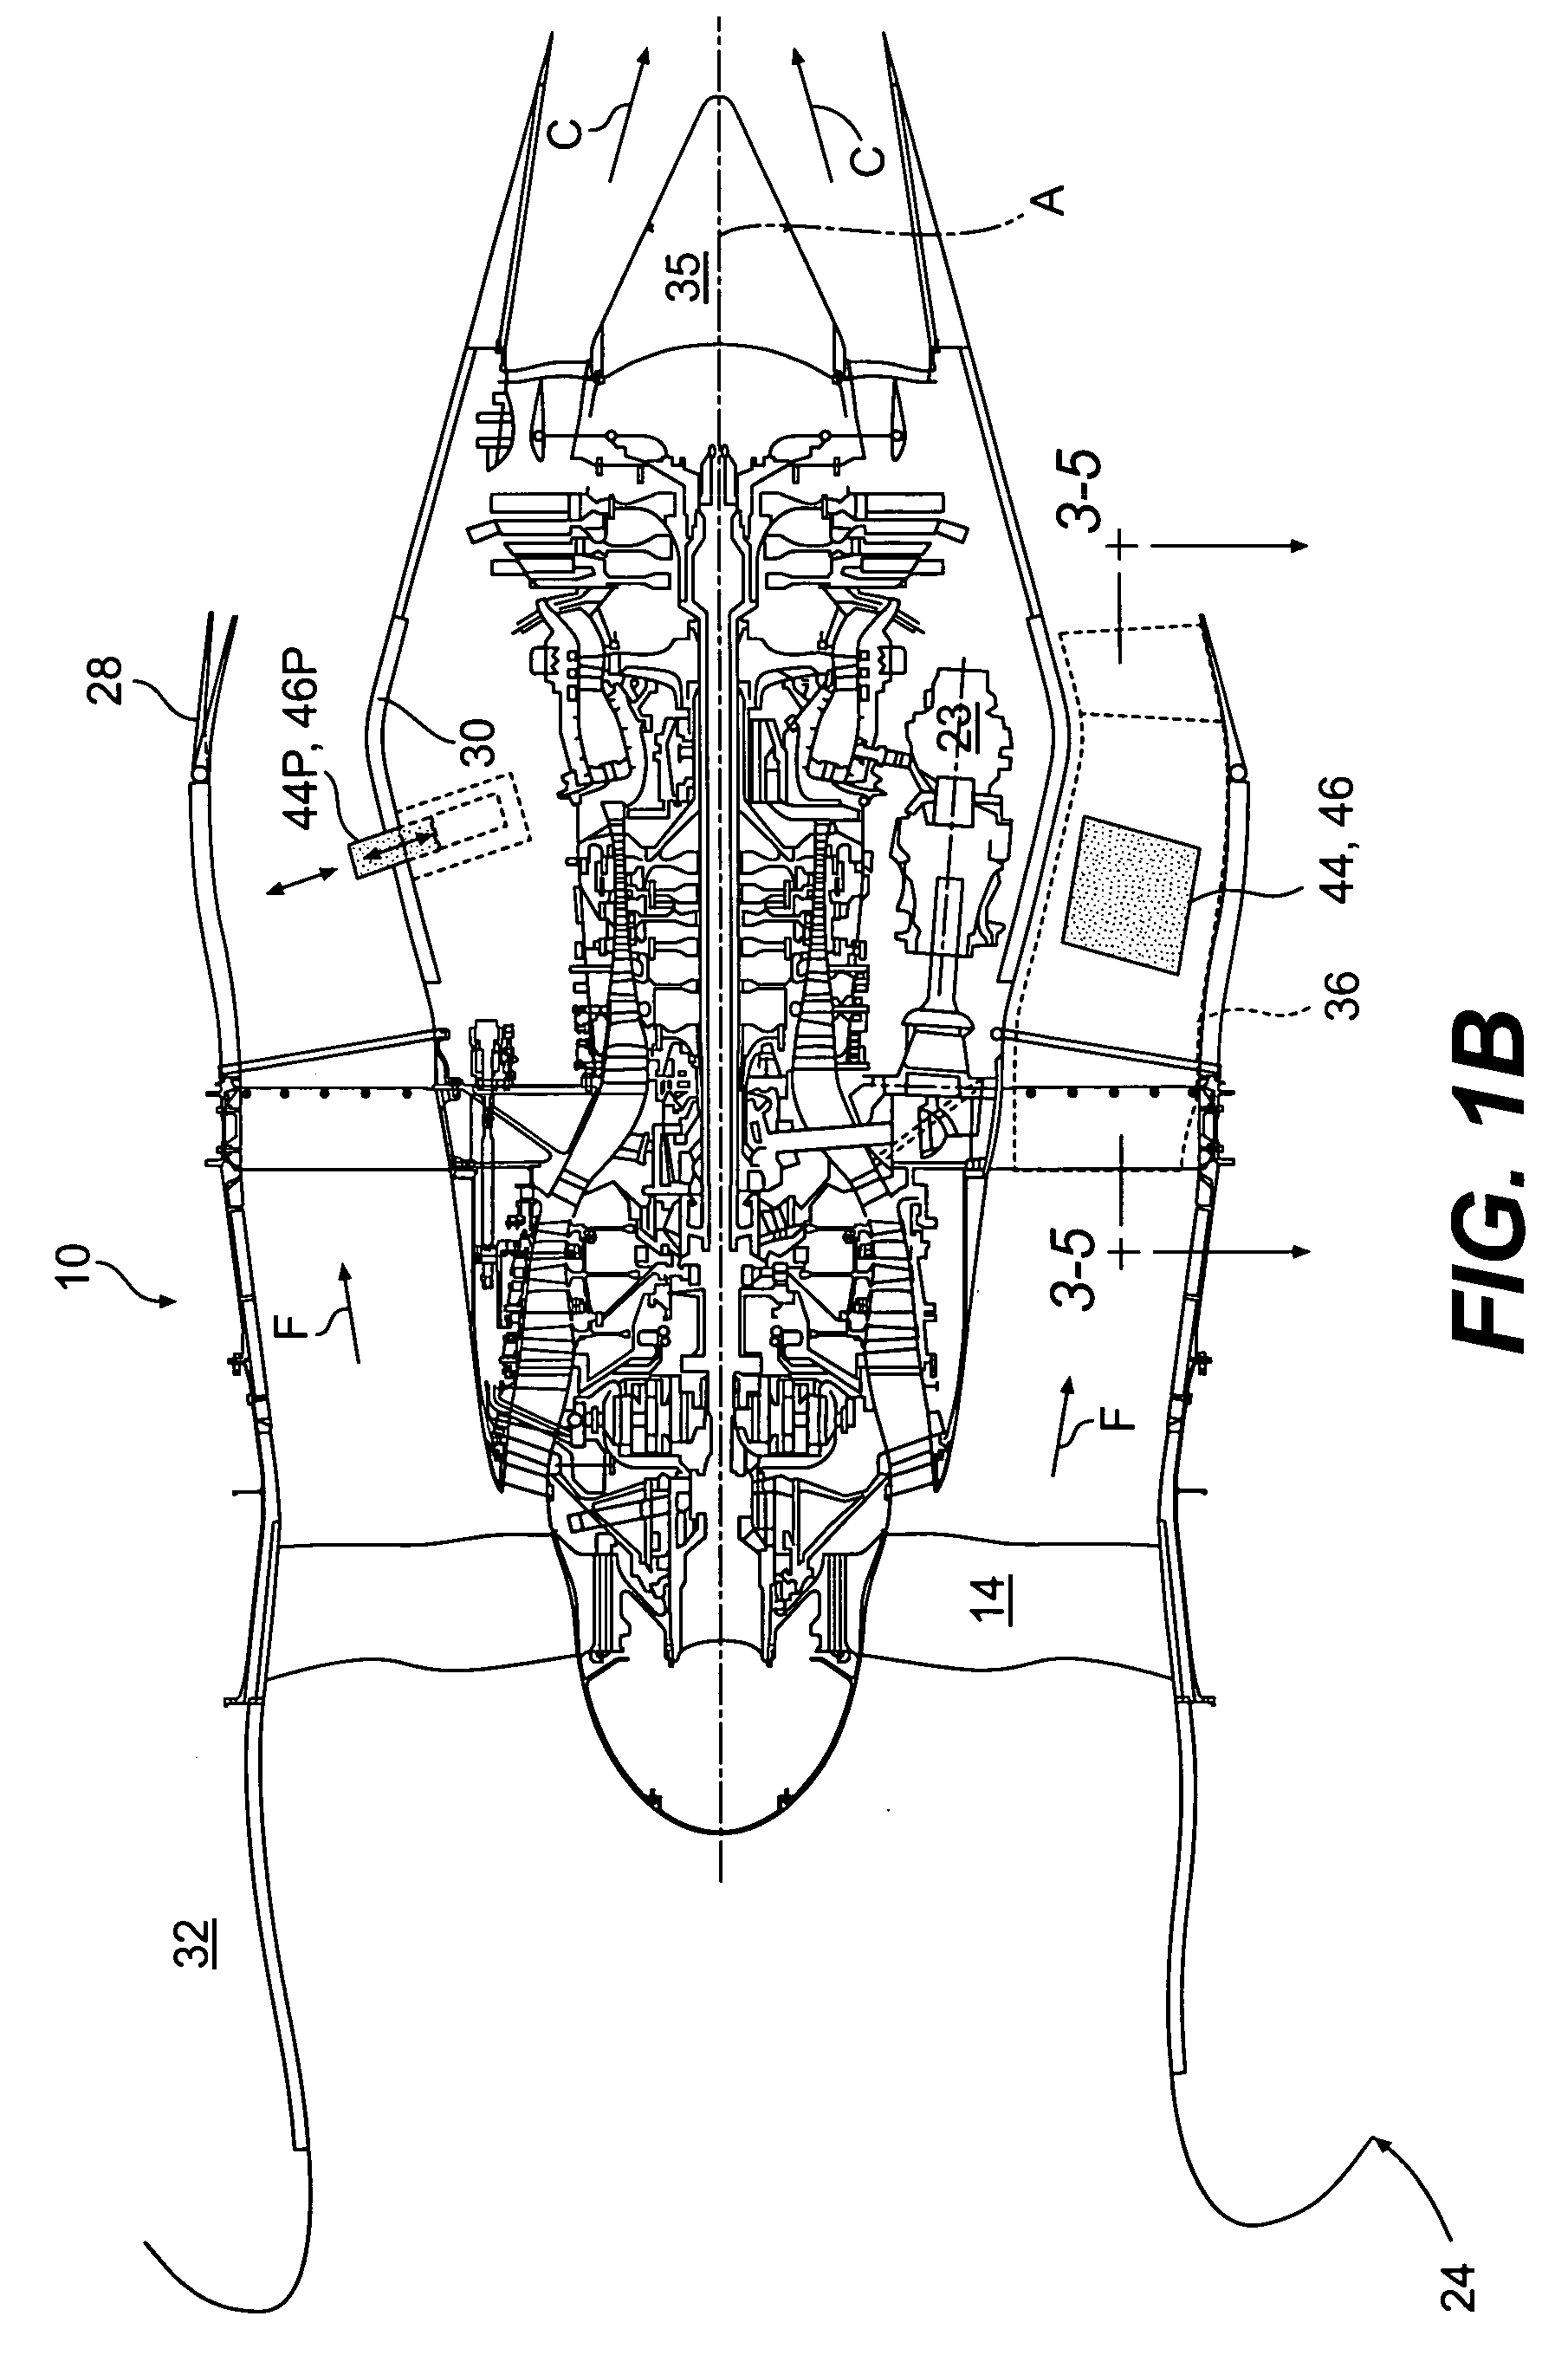 Thermal management system with thrust recovery for a gas turbine engine fan nacelle assembly